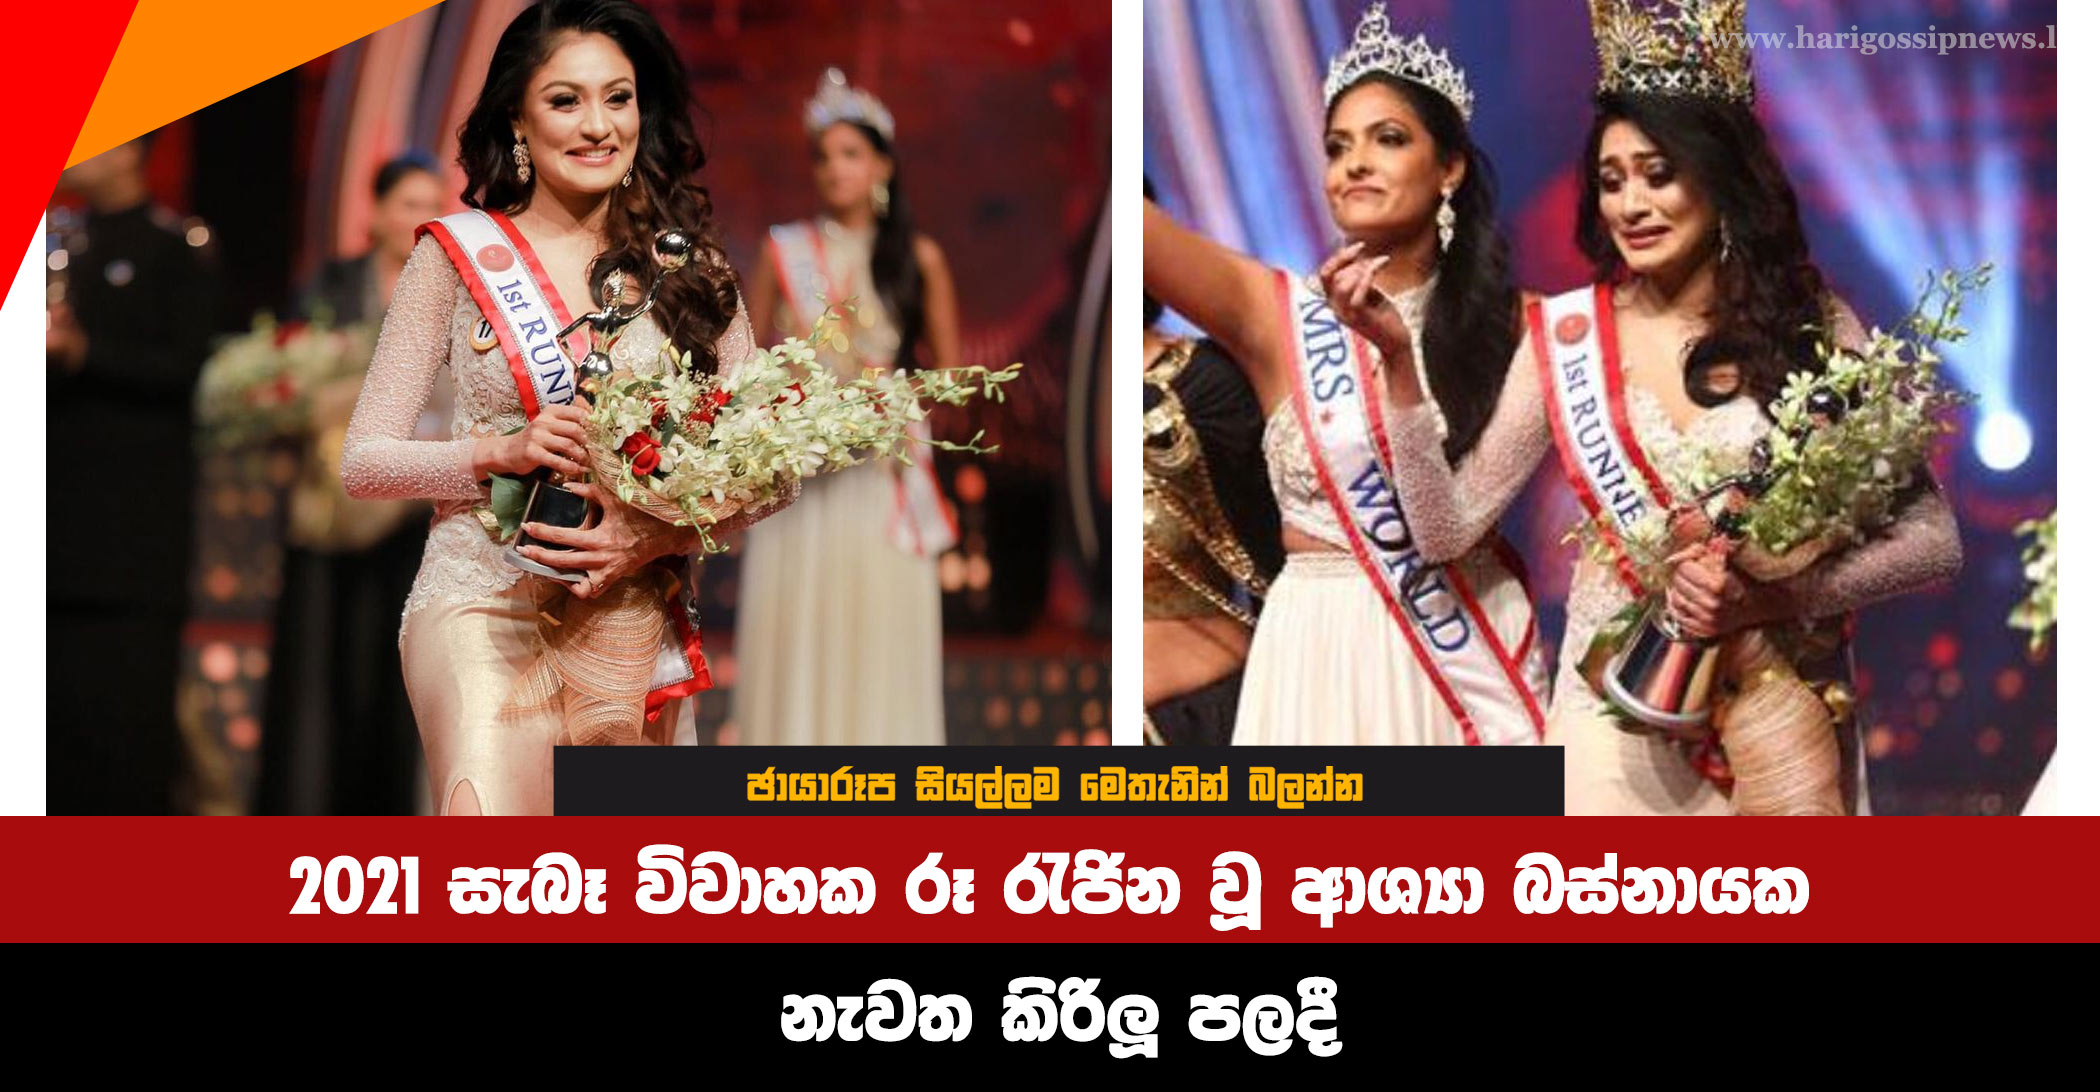 Ashaya Basnayake, the real bridal beauty queen of 2021, is crowned again.